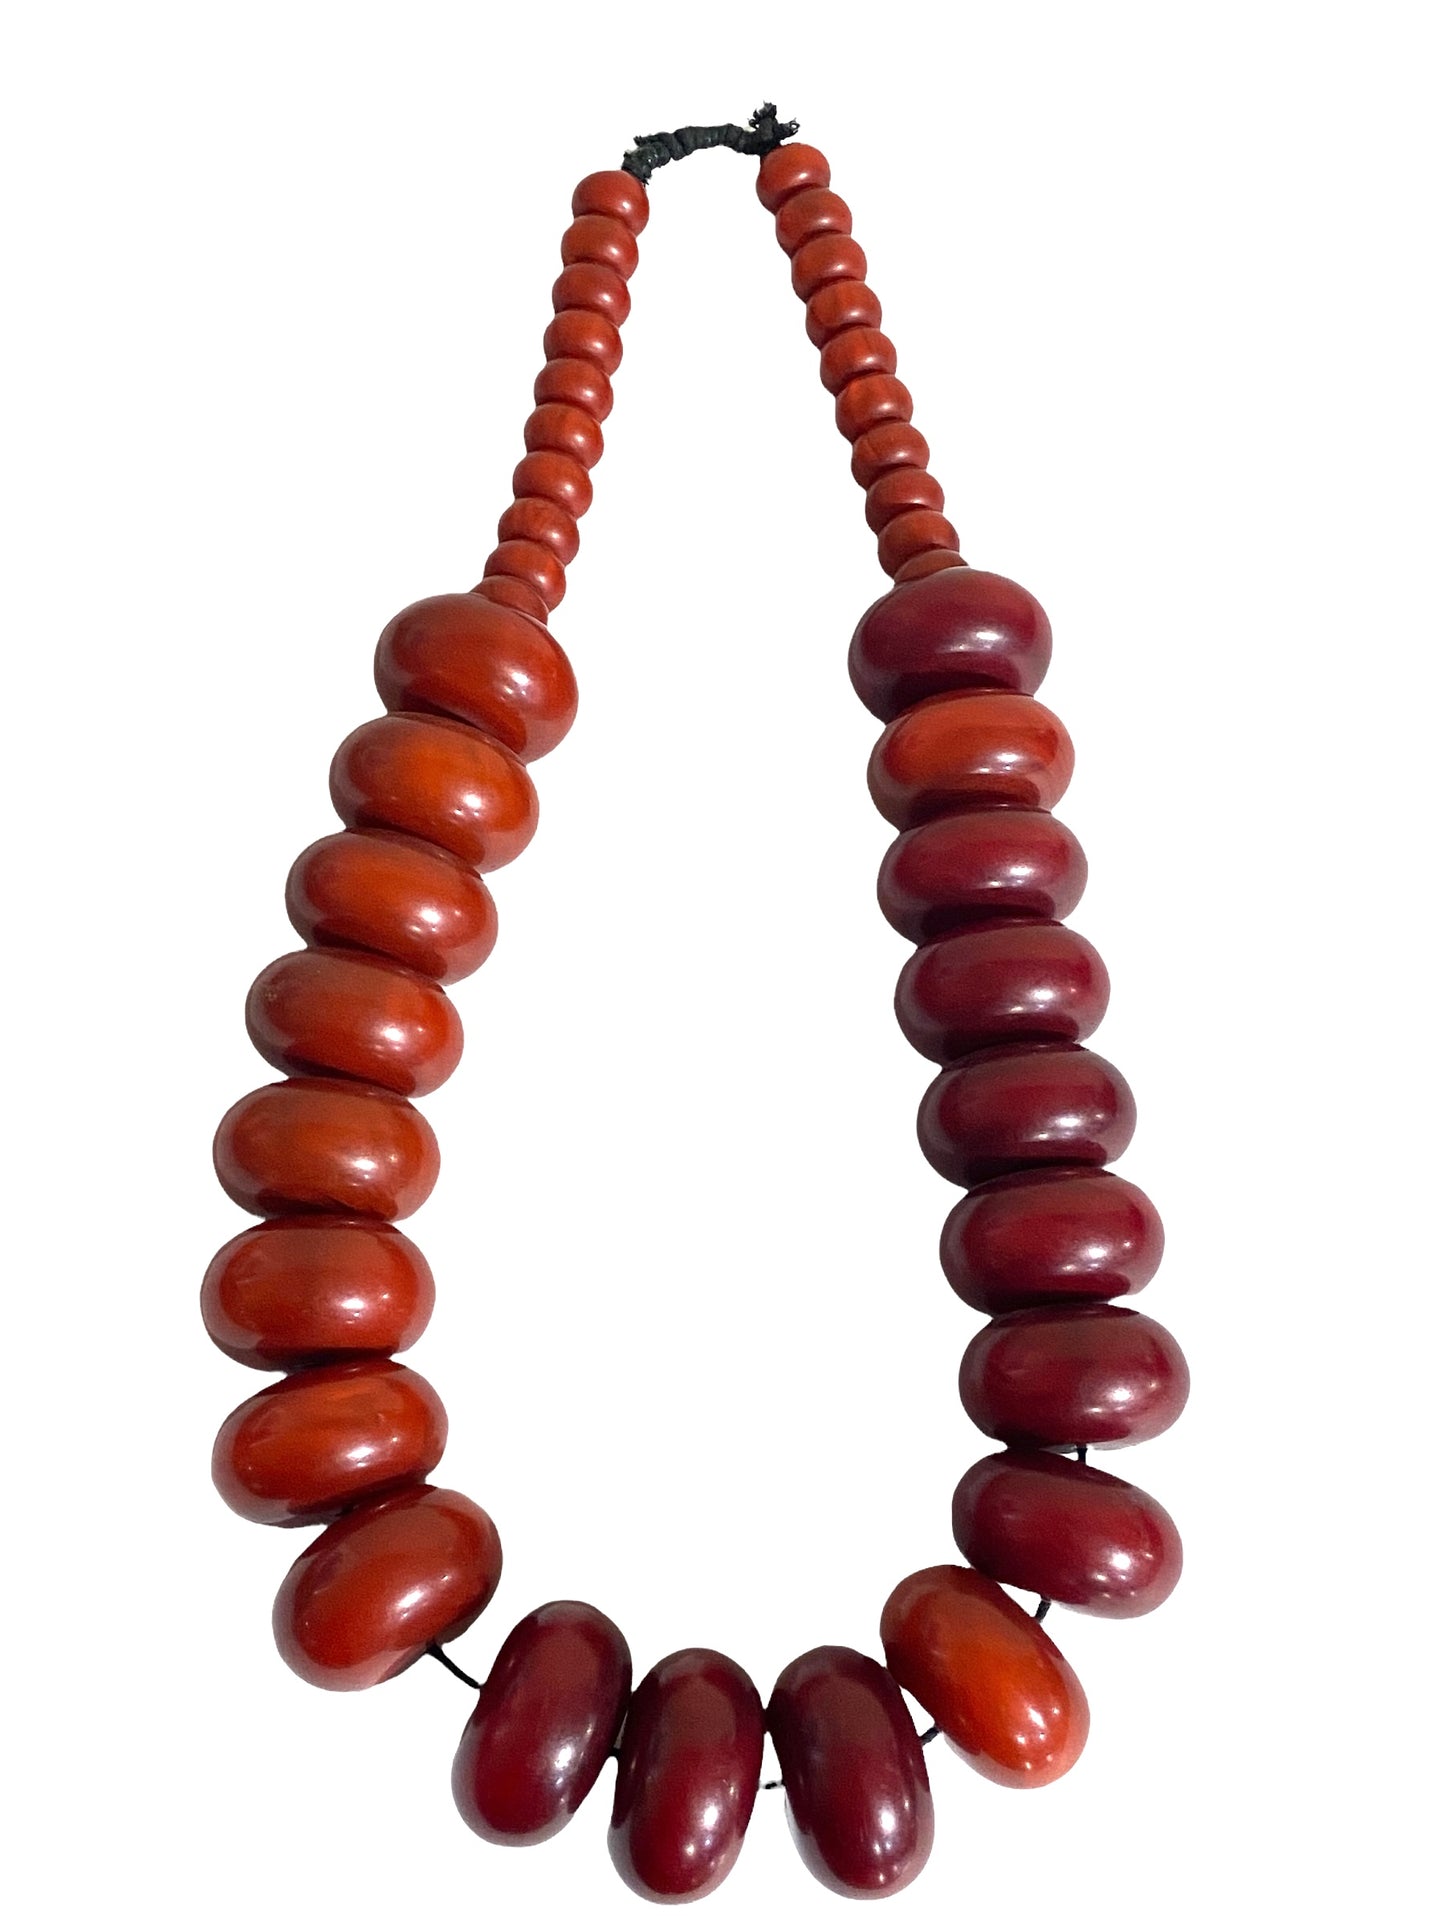 #4553 Superb Vintage African Simulated Amber Necklace W/ 36 Trade Beads